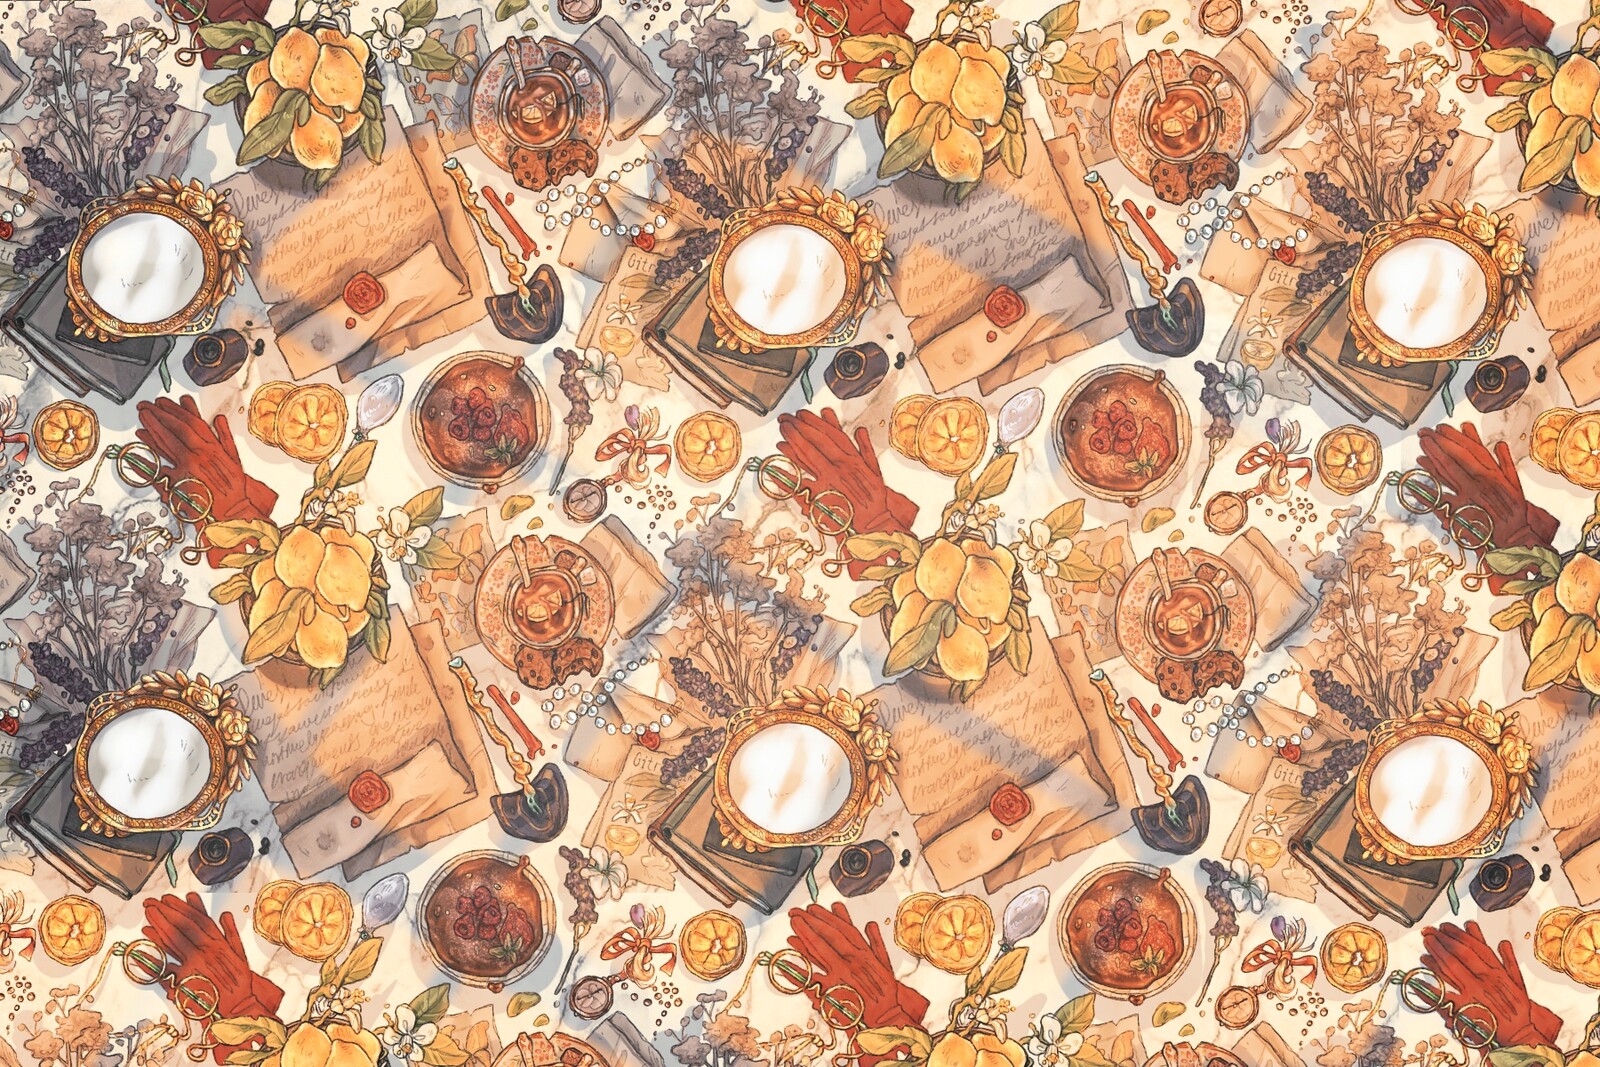 A pattern inspired by my personal project "The Hideaway". Hoping to create a timeless atmosphere with aspects from the Victorian/Edwardian era(or just vintage).